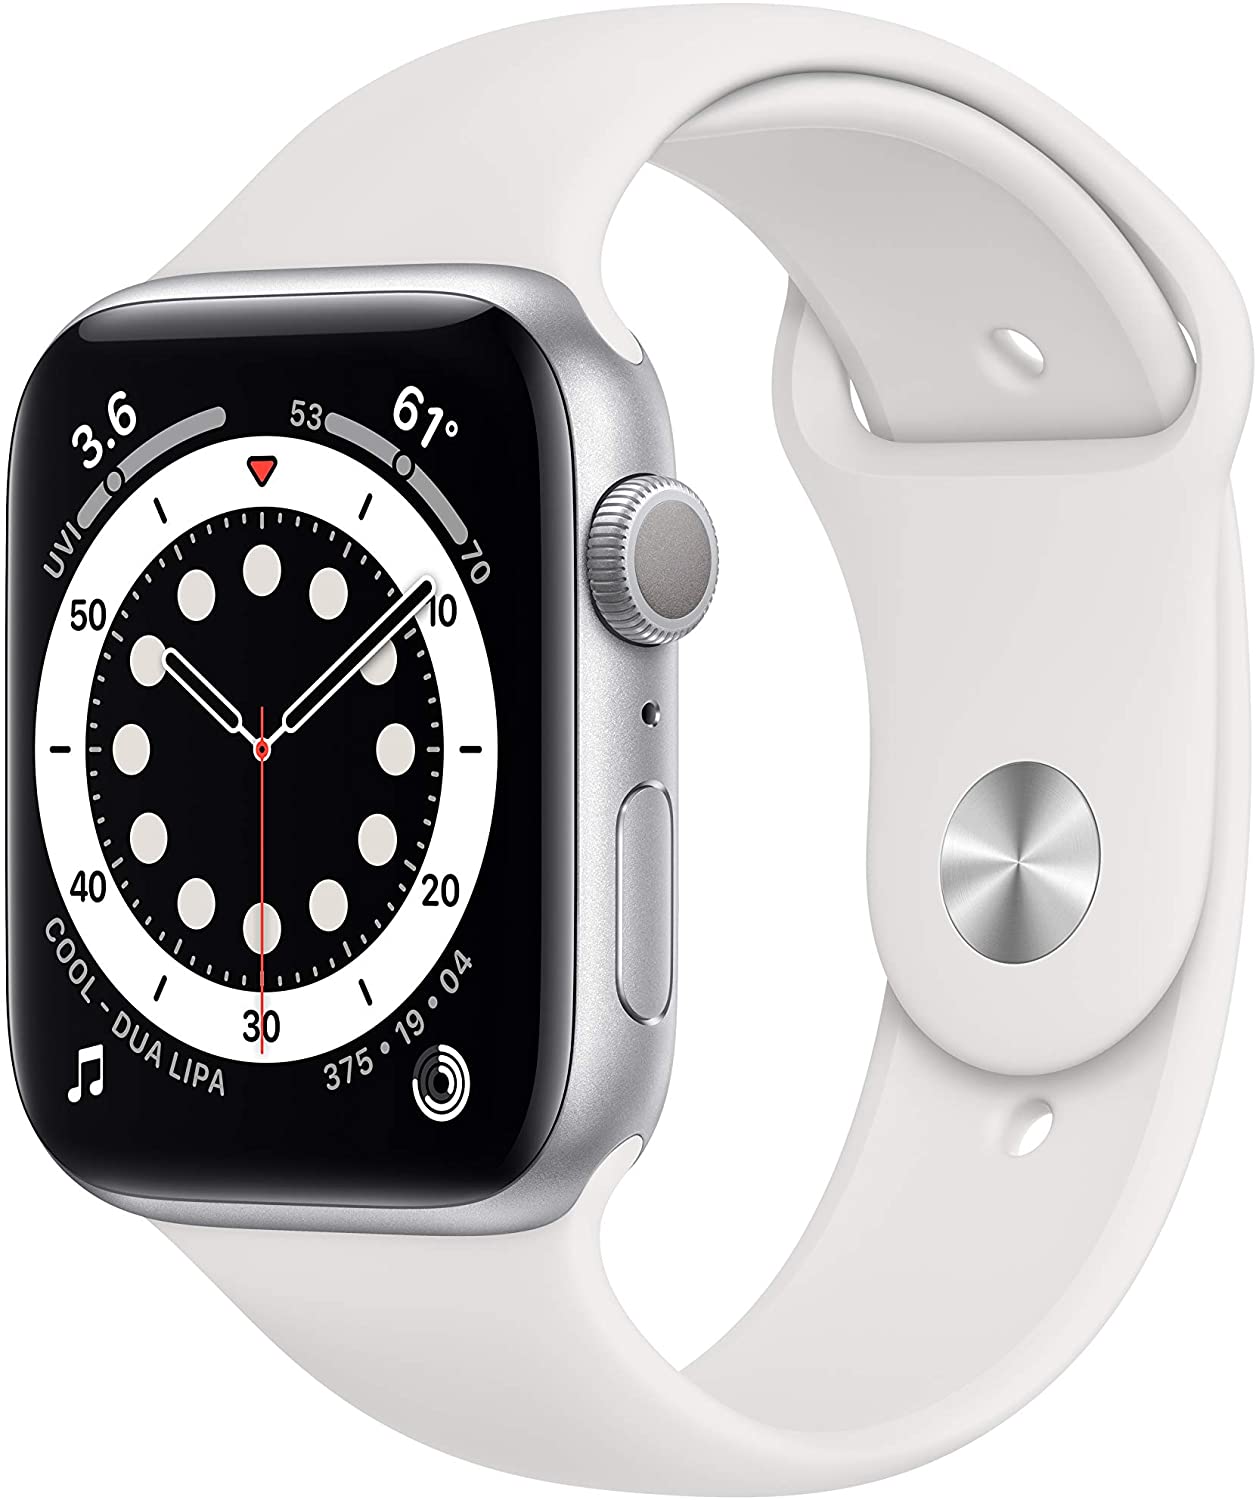 New Apple Watch Series 6 (GPS, 44mm) - Silver Aluminum Case with White Sport Band